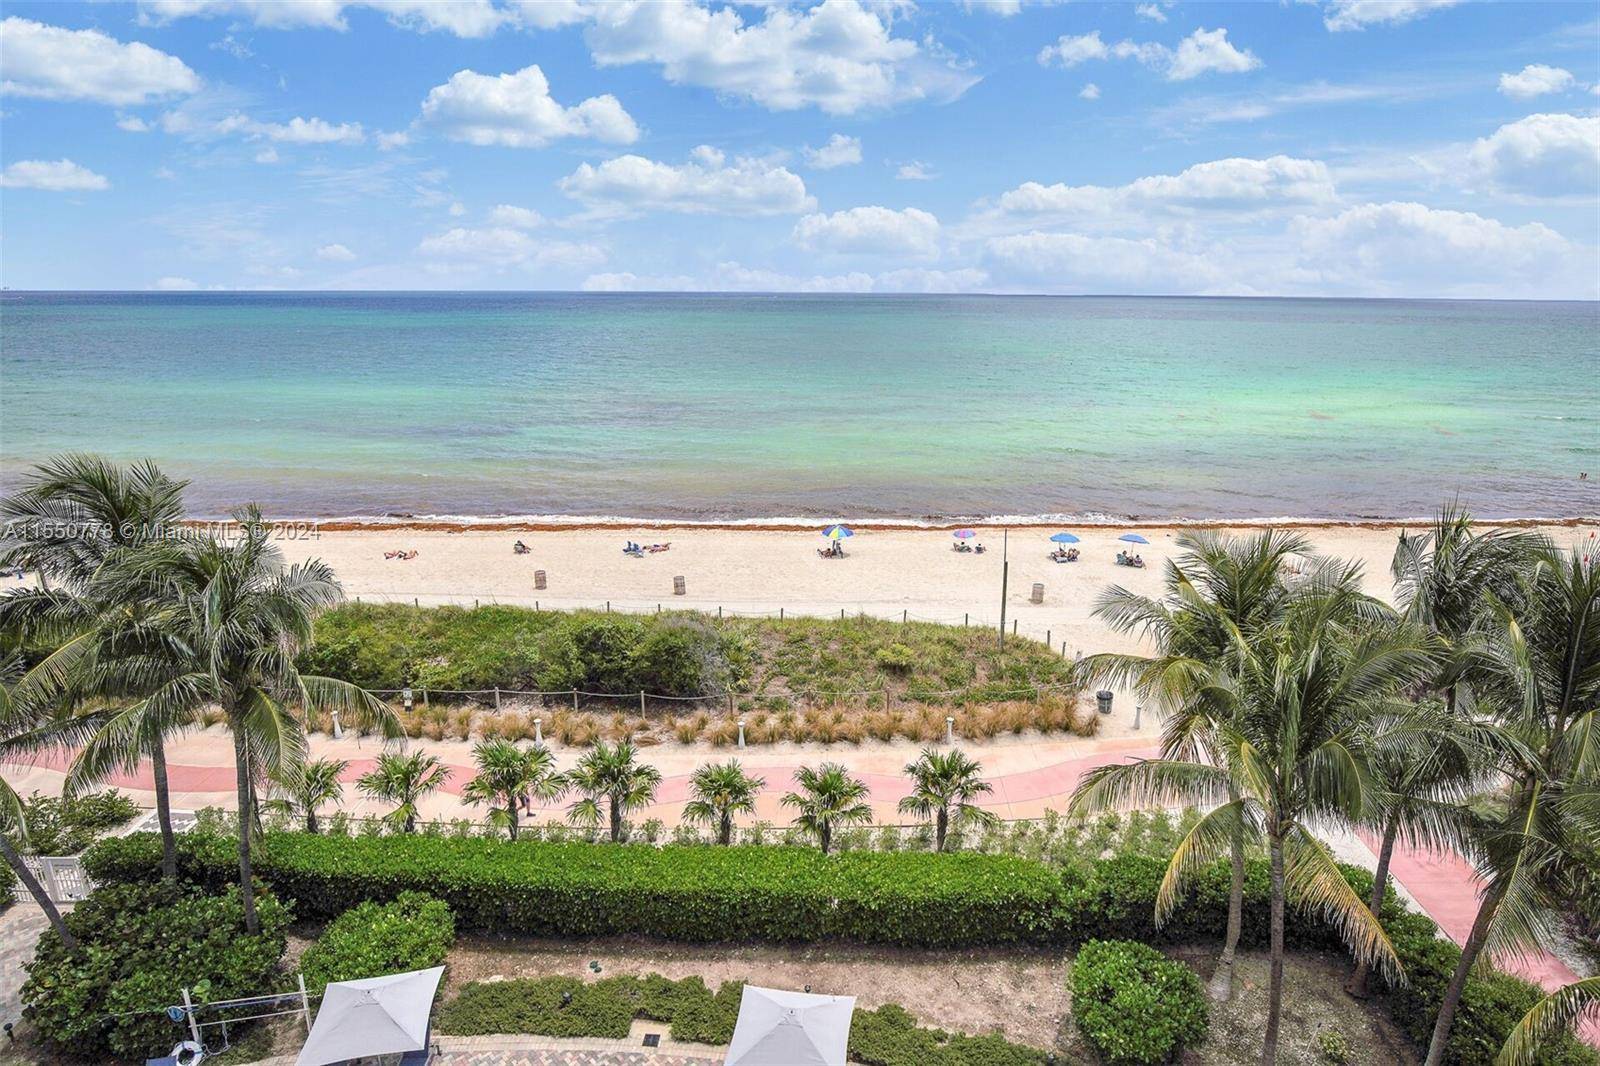 RARELY AVAILABLE BATHED IN WARM NATURAL LIGHT FROM FLOOR TO CEILING GLASS WINDOWS AND SLIDING DOORS, FURNISHED 2 2 CONDO OFFERING BREATHTAKING ENDLESS DIRECT VIEWS OF OCEAN FROM EVERY ROOM ...